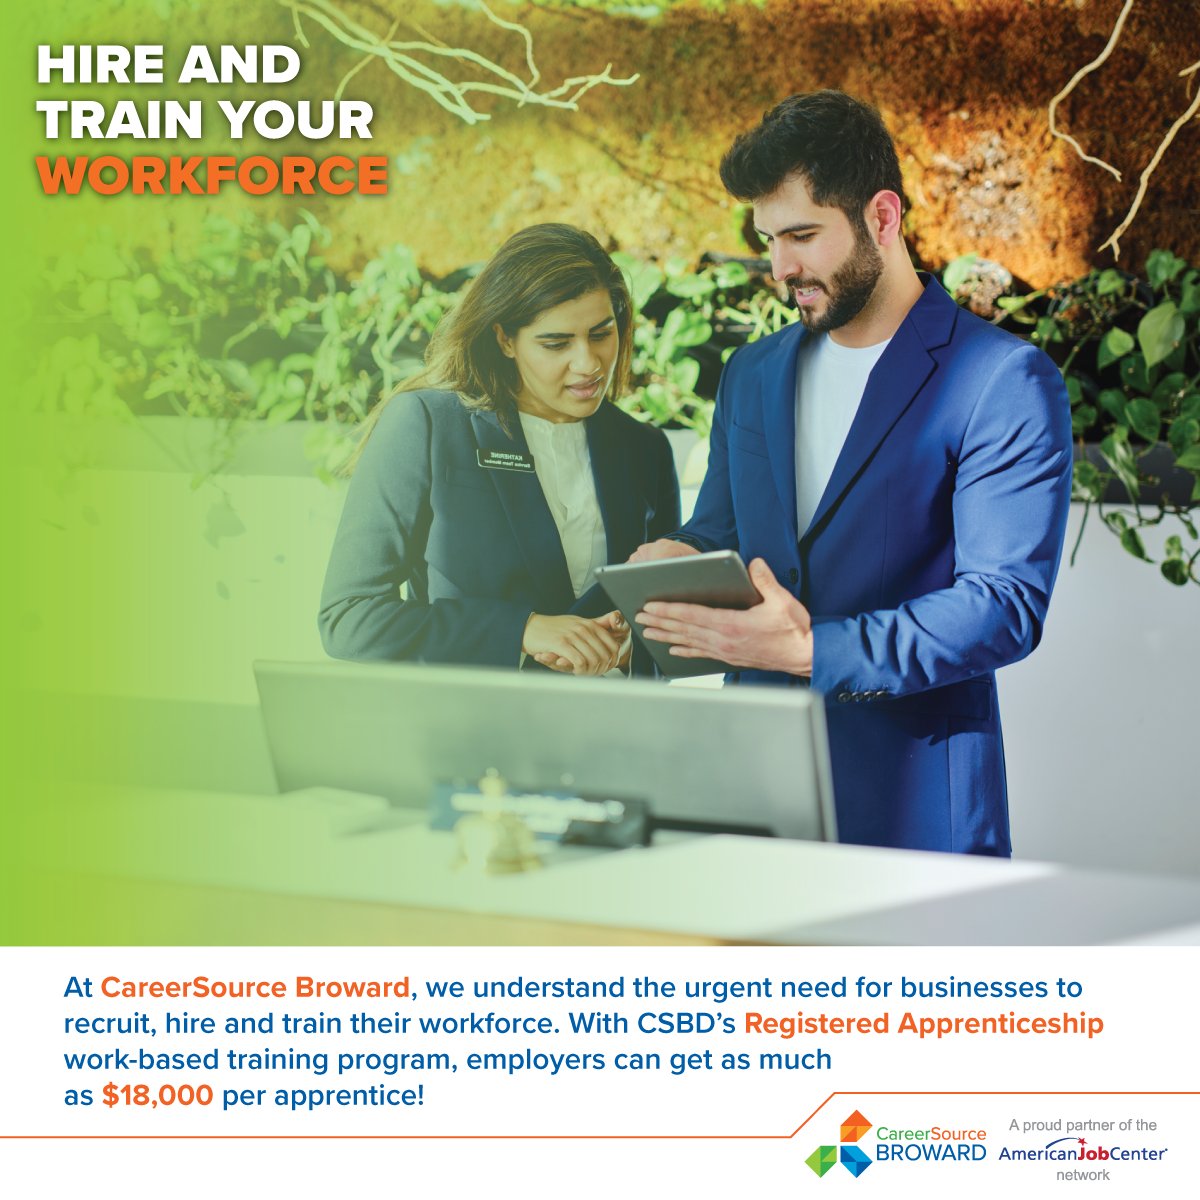 At CareerSource Broward, we understand the urgent need for businesses to recruit, hire and train their workforce. With CareerSource Broward’s Registered Apprenticeship work-based training program, employers can get as much as $18,000 per apprentice! careersourcebroward.com/employers/trai…